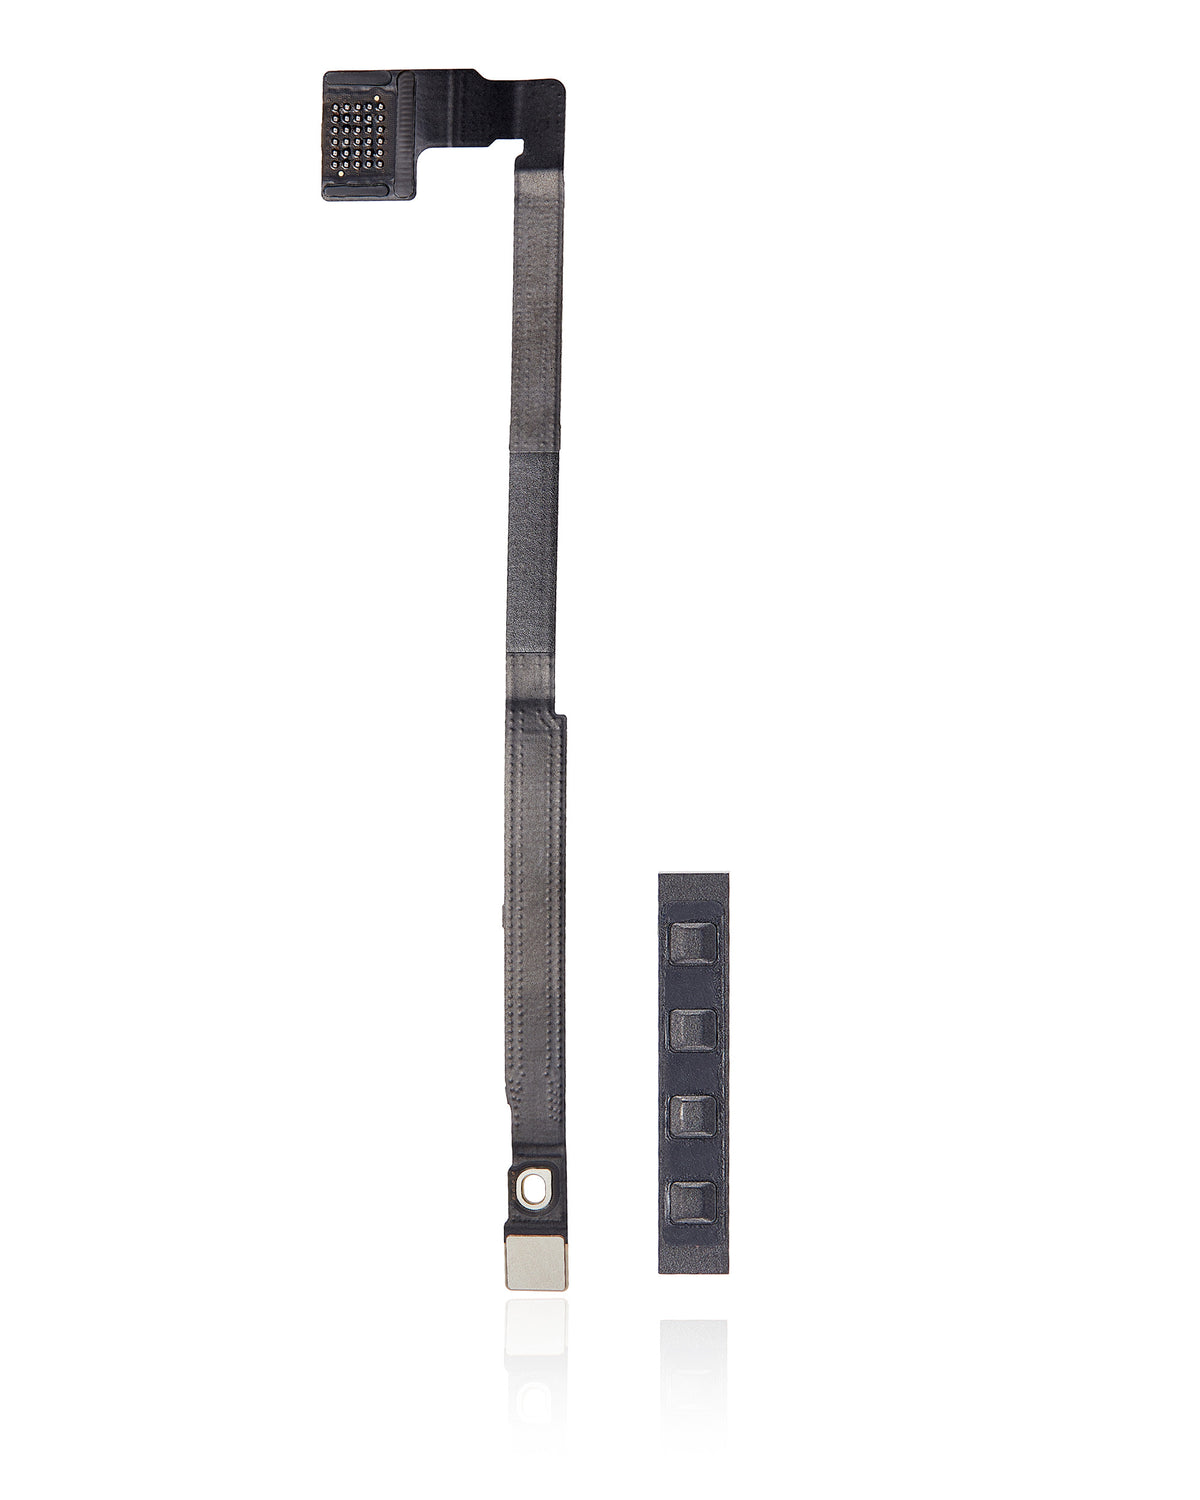 5G MODULE WITH UW ANTENNA FLEX CABLE FOR IPHONE 13 PRO